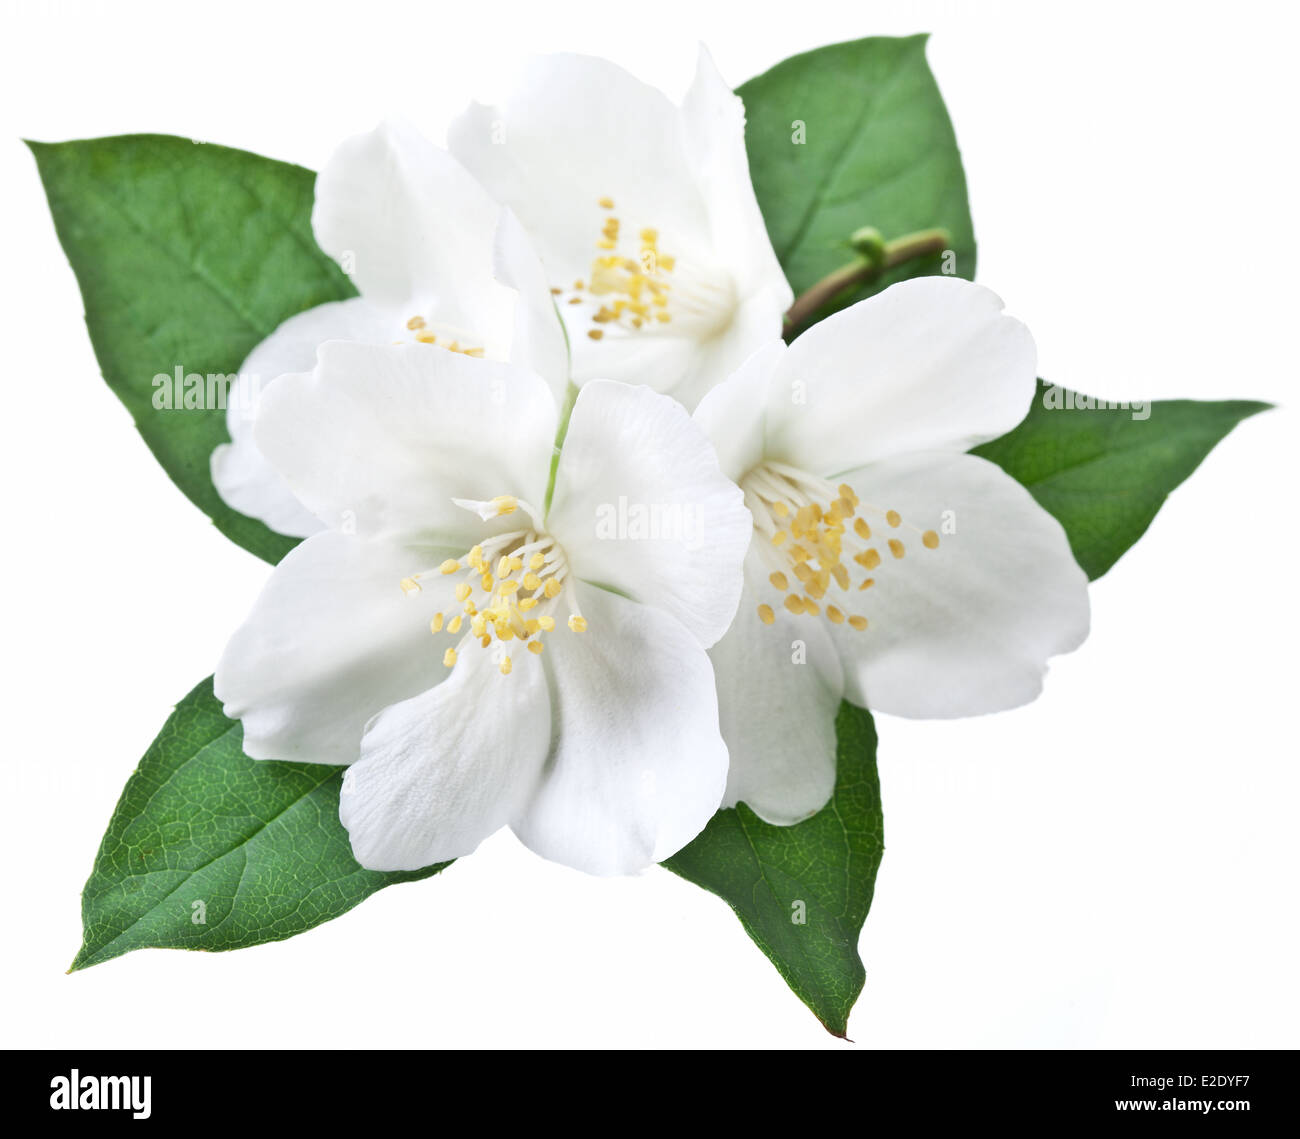 Blooming jasmine flower with leaves isolated on a white background. Stock Photo